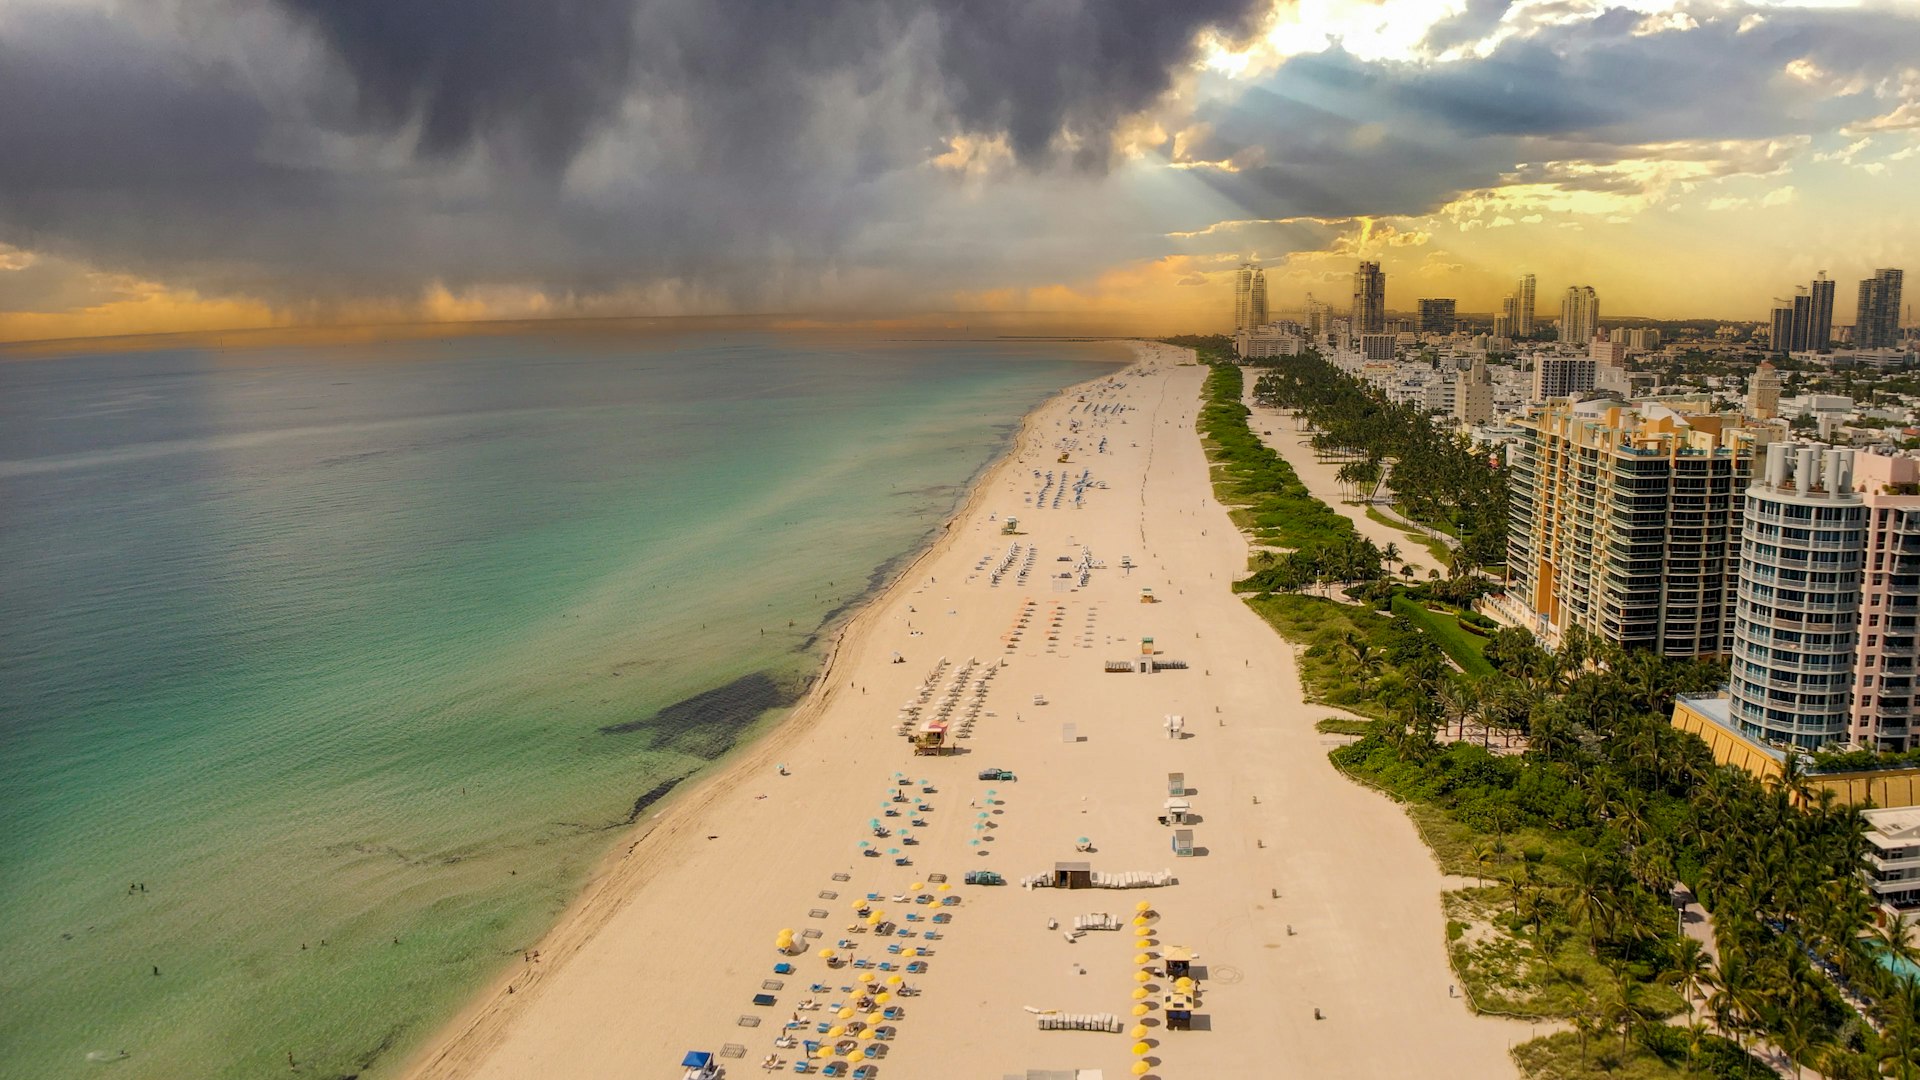 An arial view of Miami Beach in June, with dark gray rain clouds looming in the sky